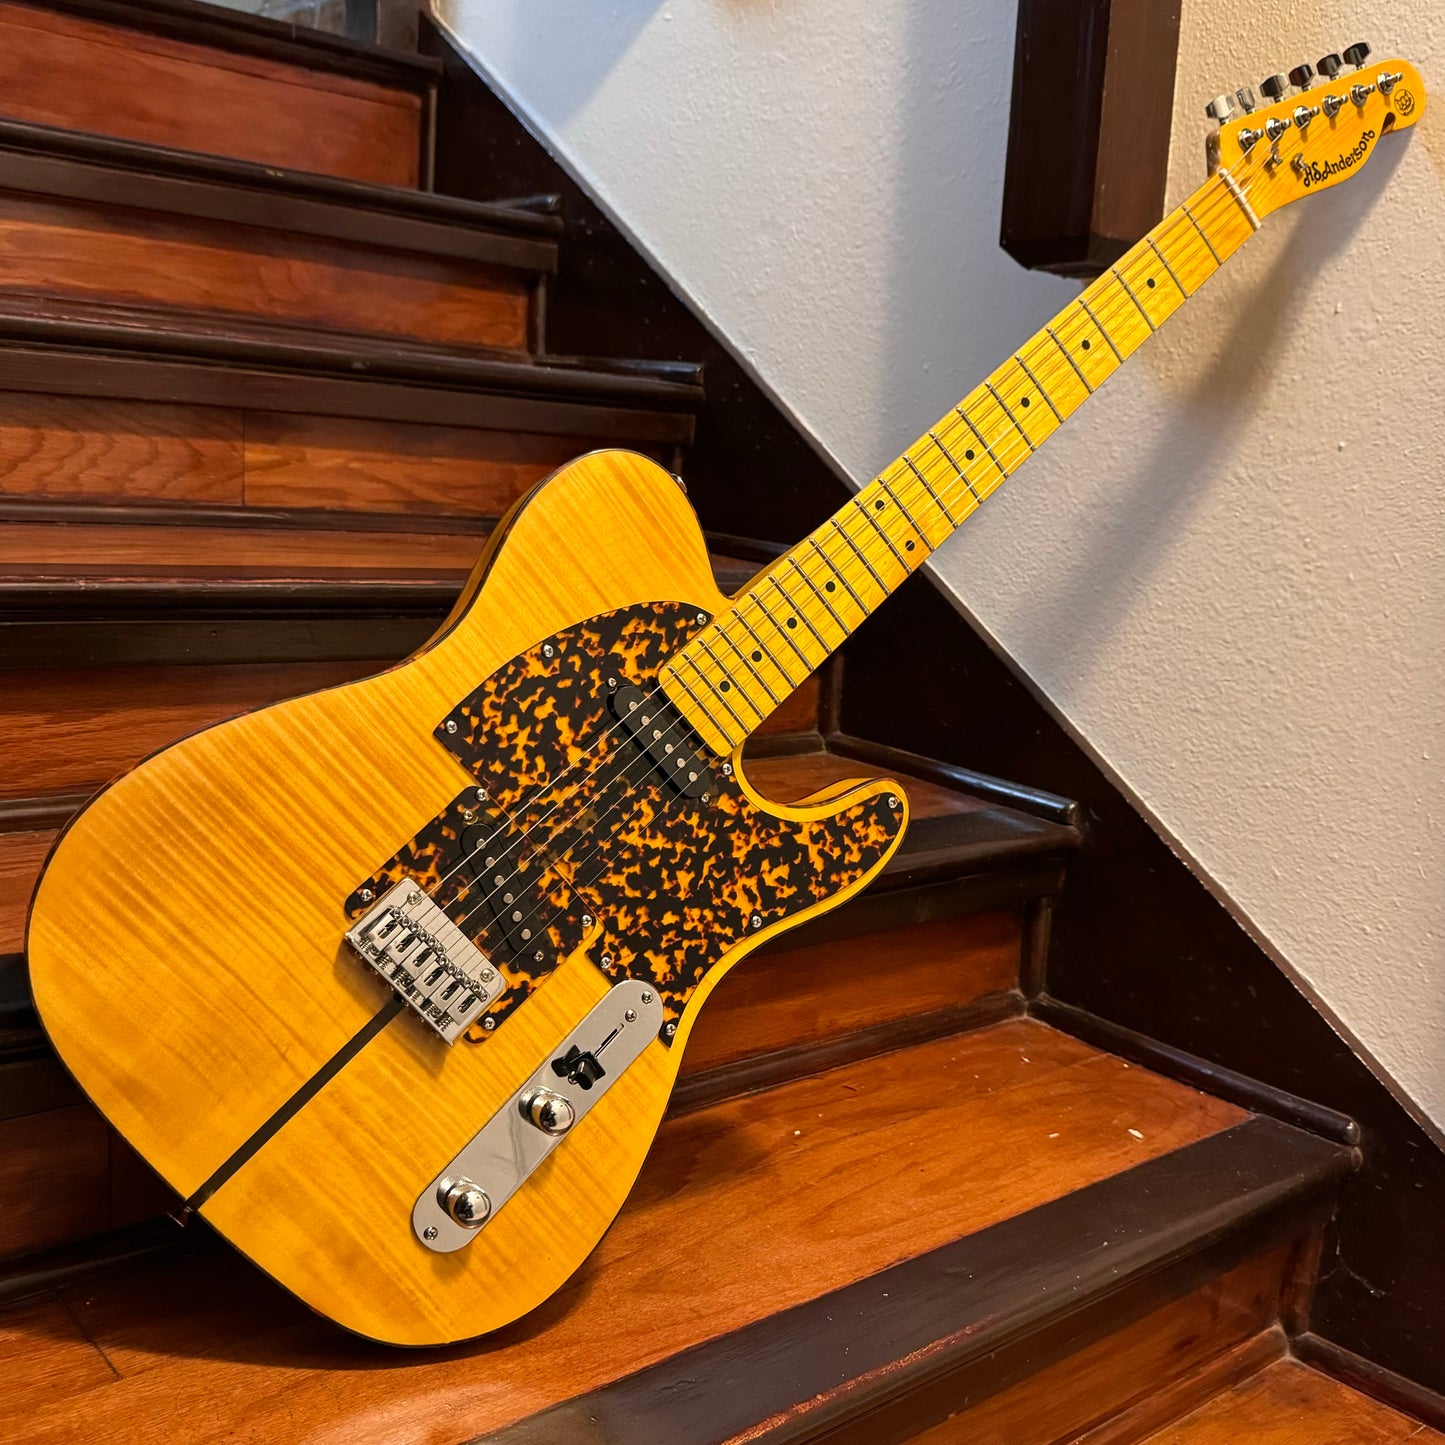 Refurbished Madcat-Style Electric Guitar Clone